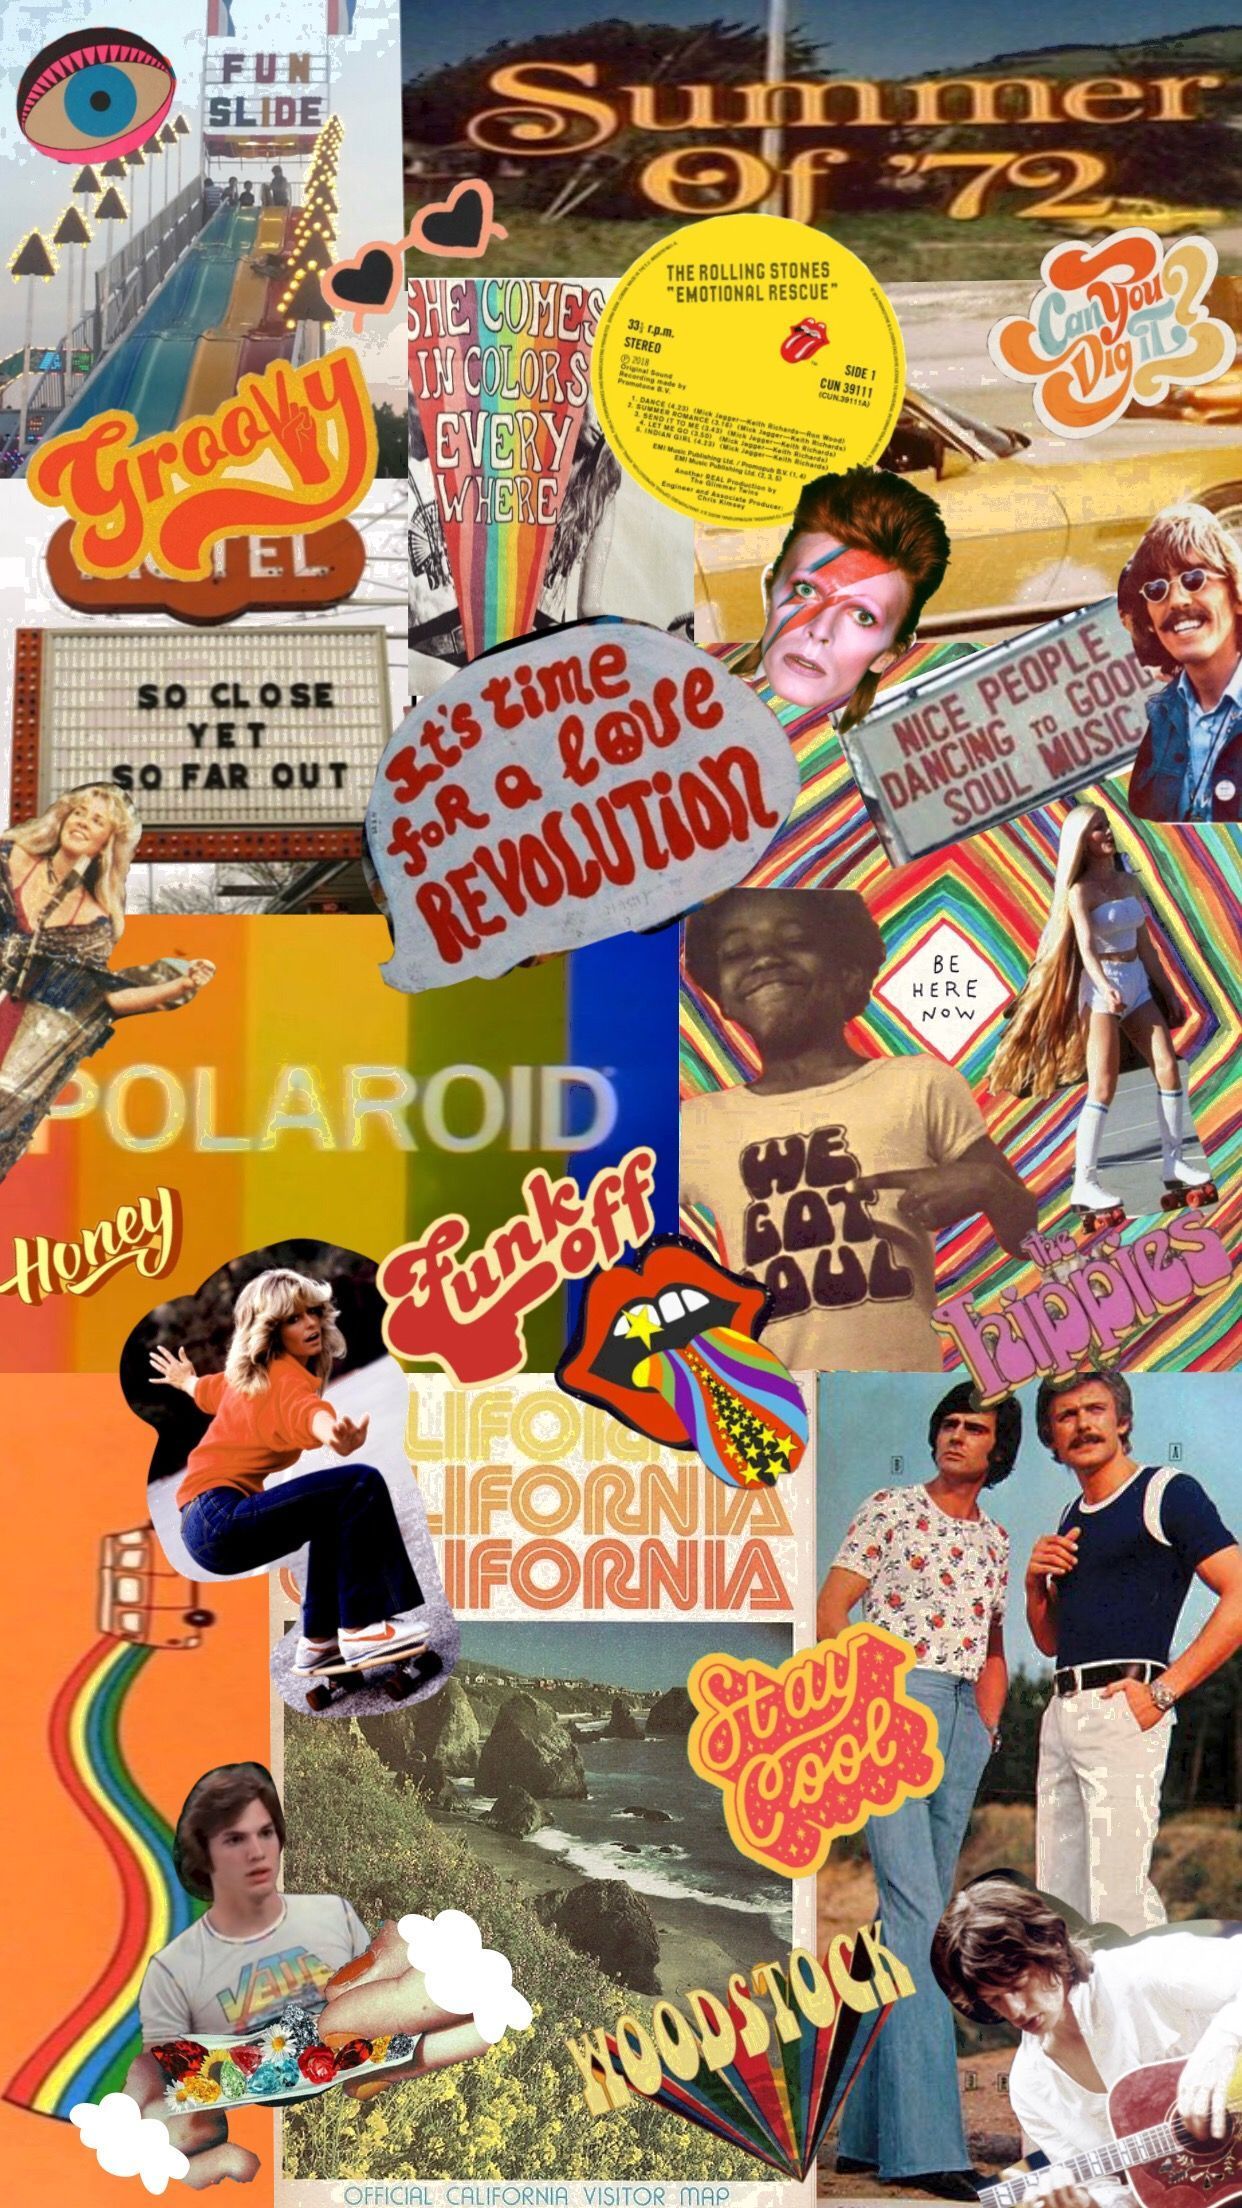 A collage of vintage 70s images, including Polaroid, California, and a man in a rainbow shirt. - 60s, 80s, David Bowie, 70s